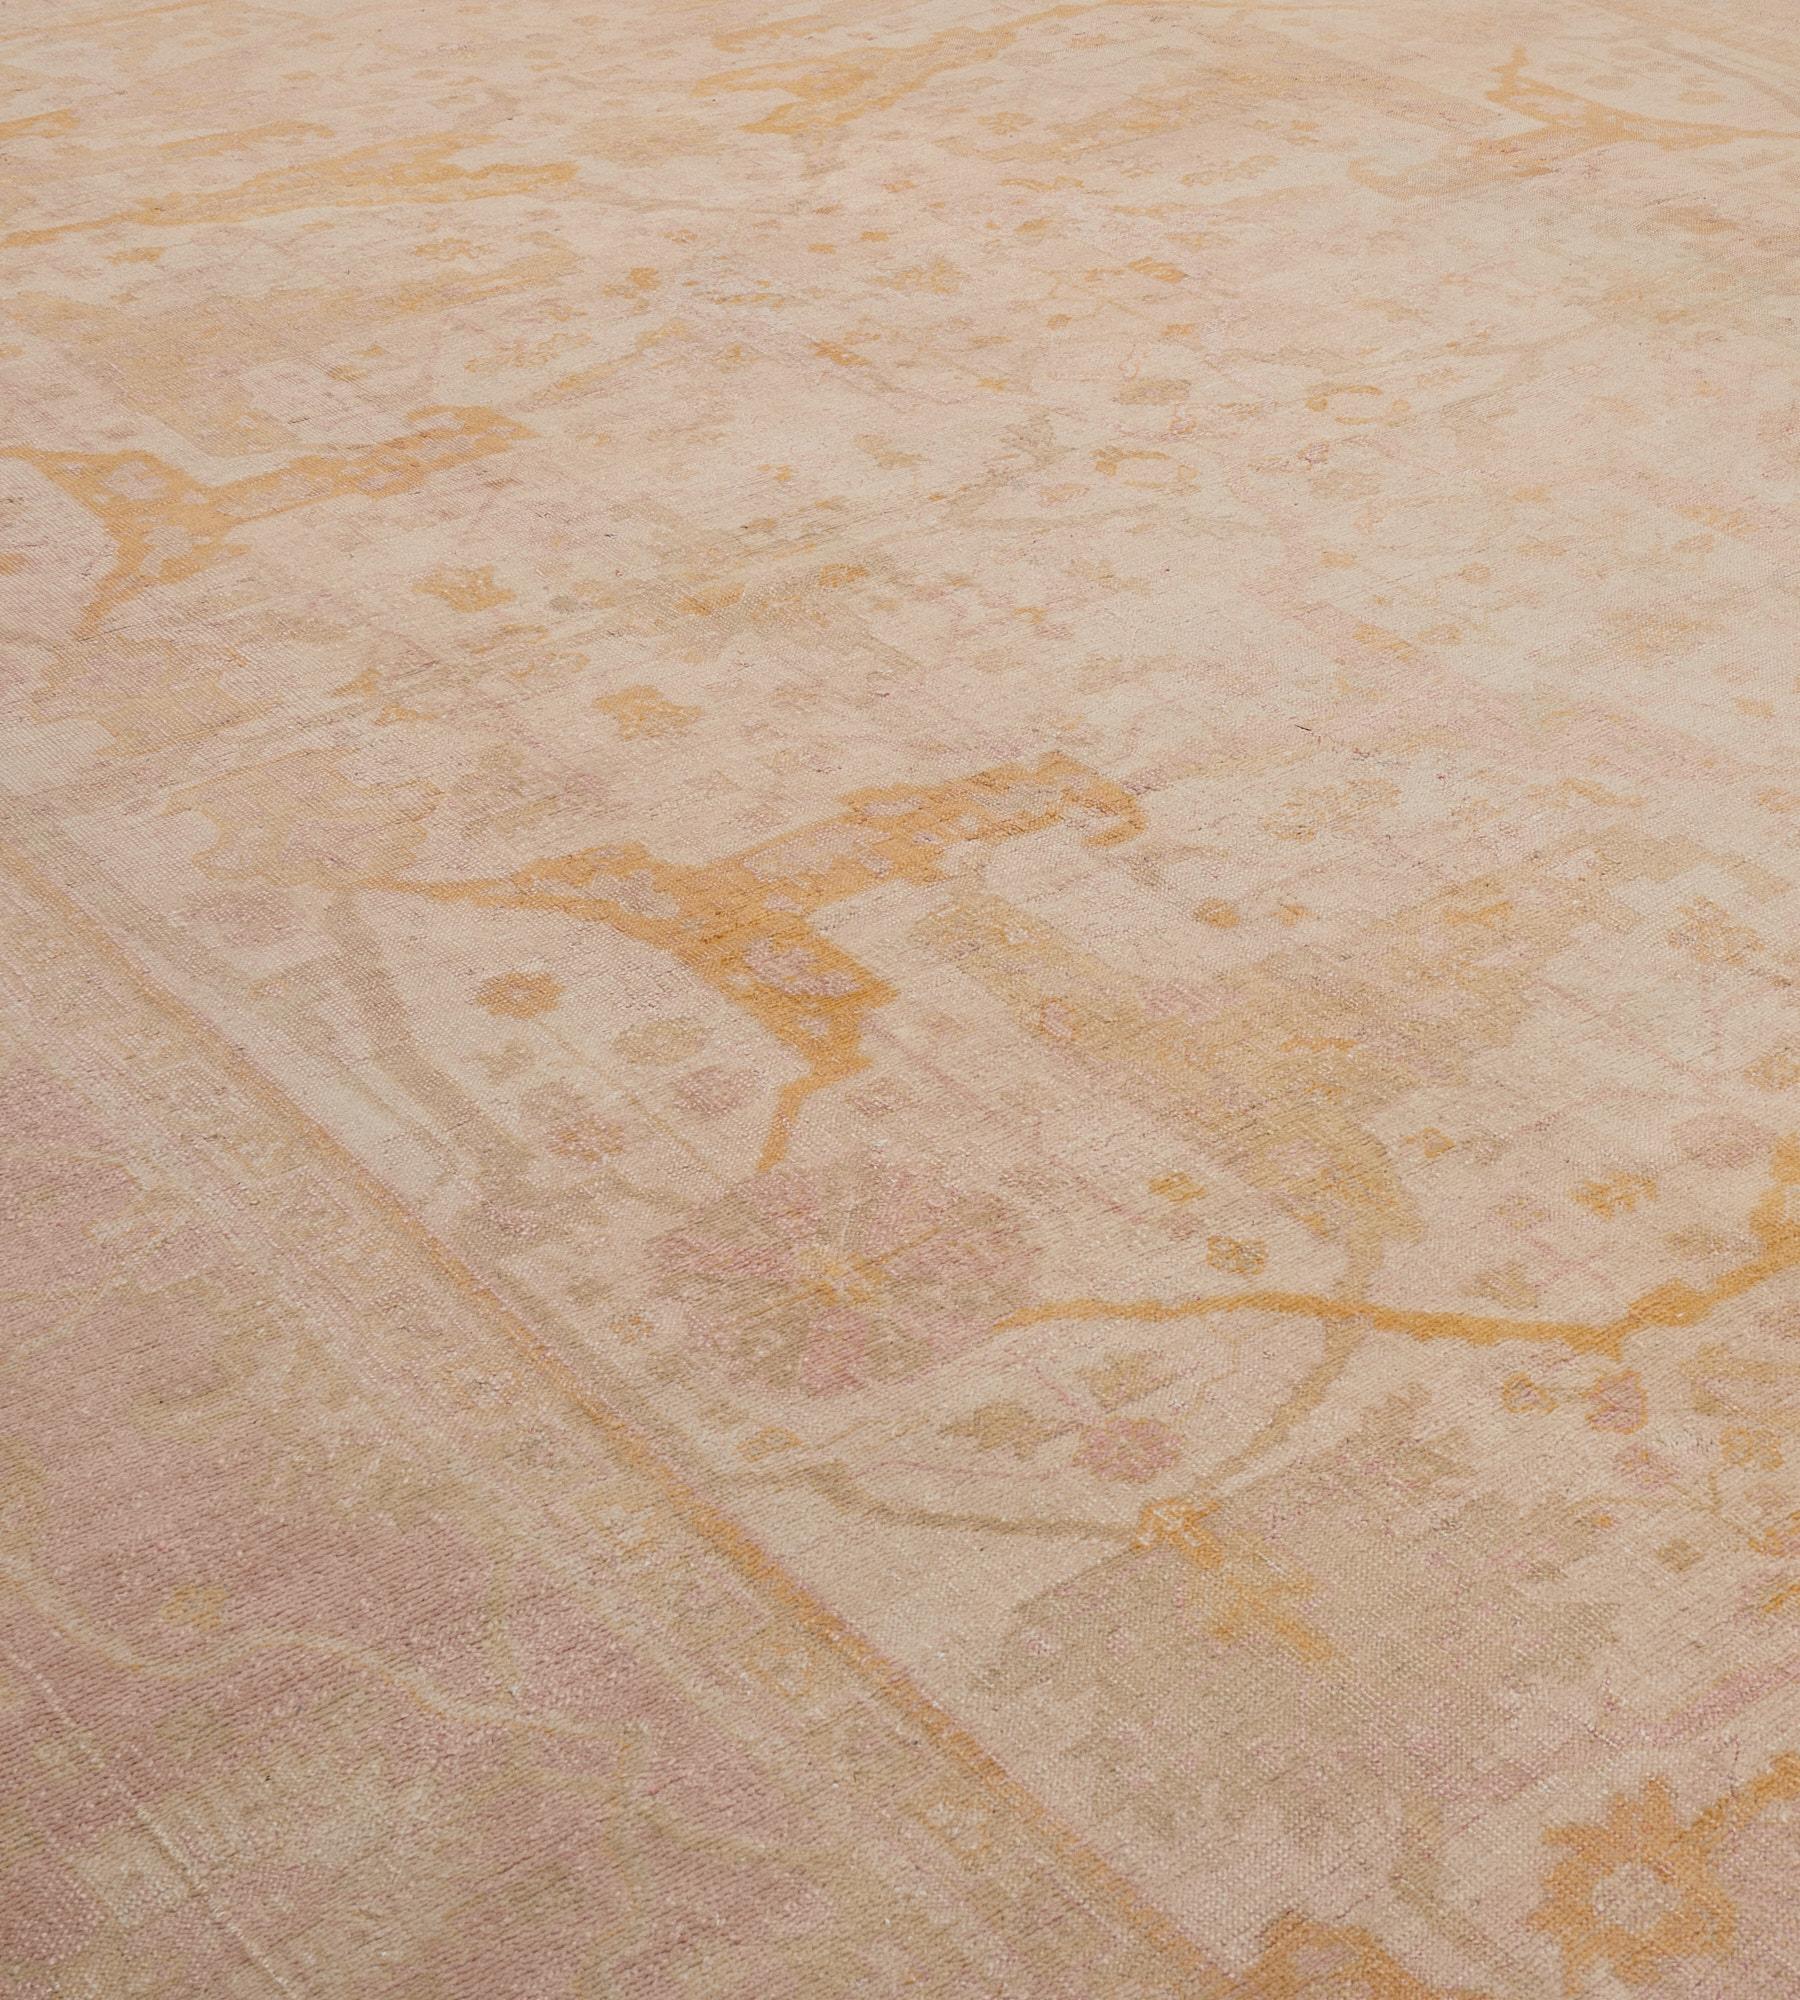 This antique Oushak rug has an ivory field with an overall design of caramel-brown and shaded light grey split palmette vine linking bold dusty-pink and light grey palmette and floral vines, in a broad dusty-pink border of meandering vine linking